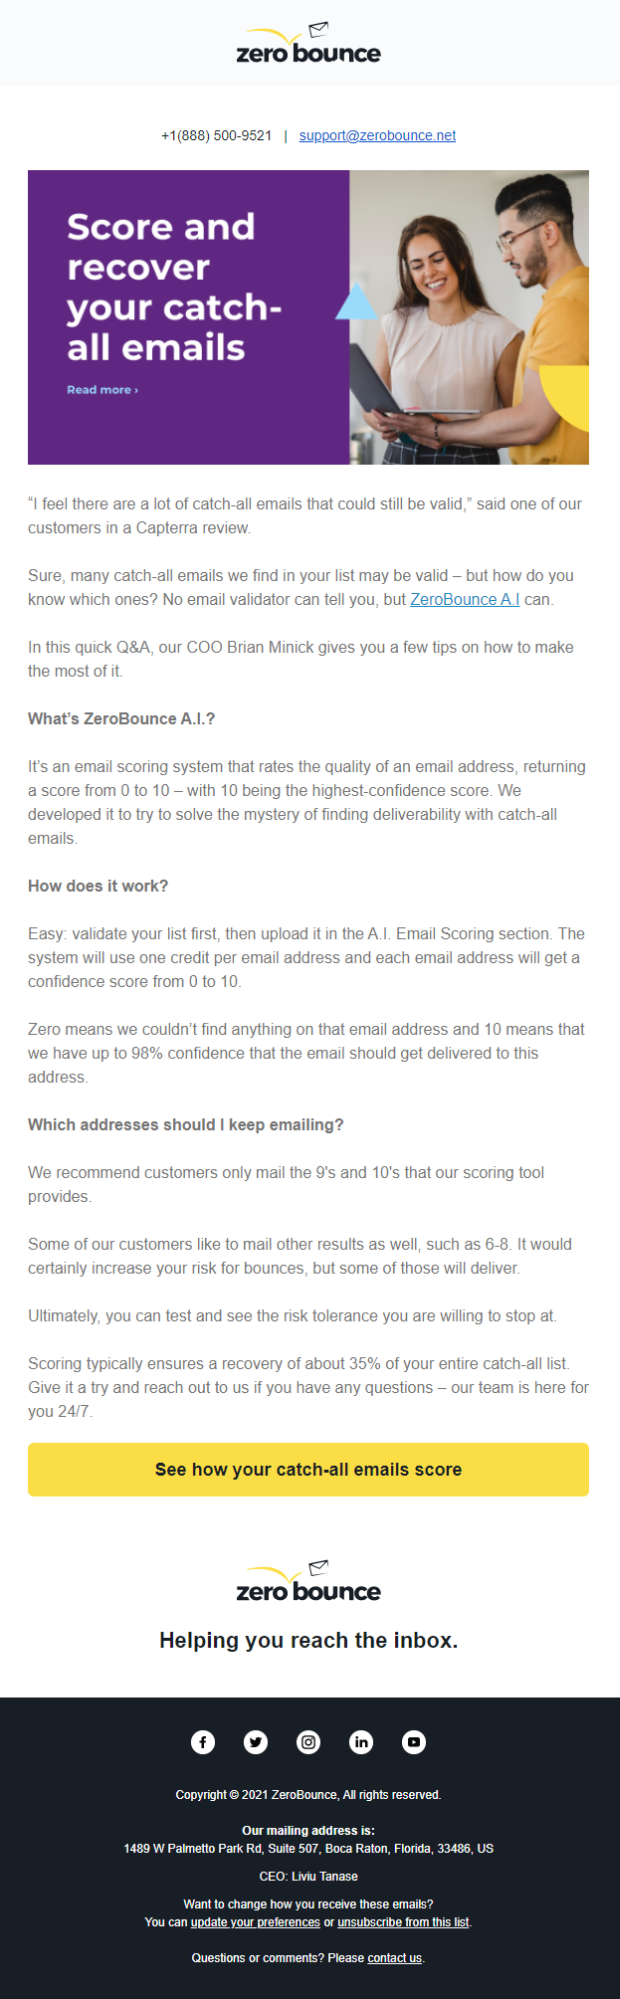 An example of an email newsletter from ZeroBounce